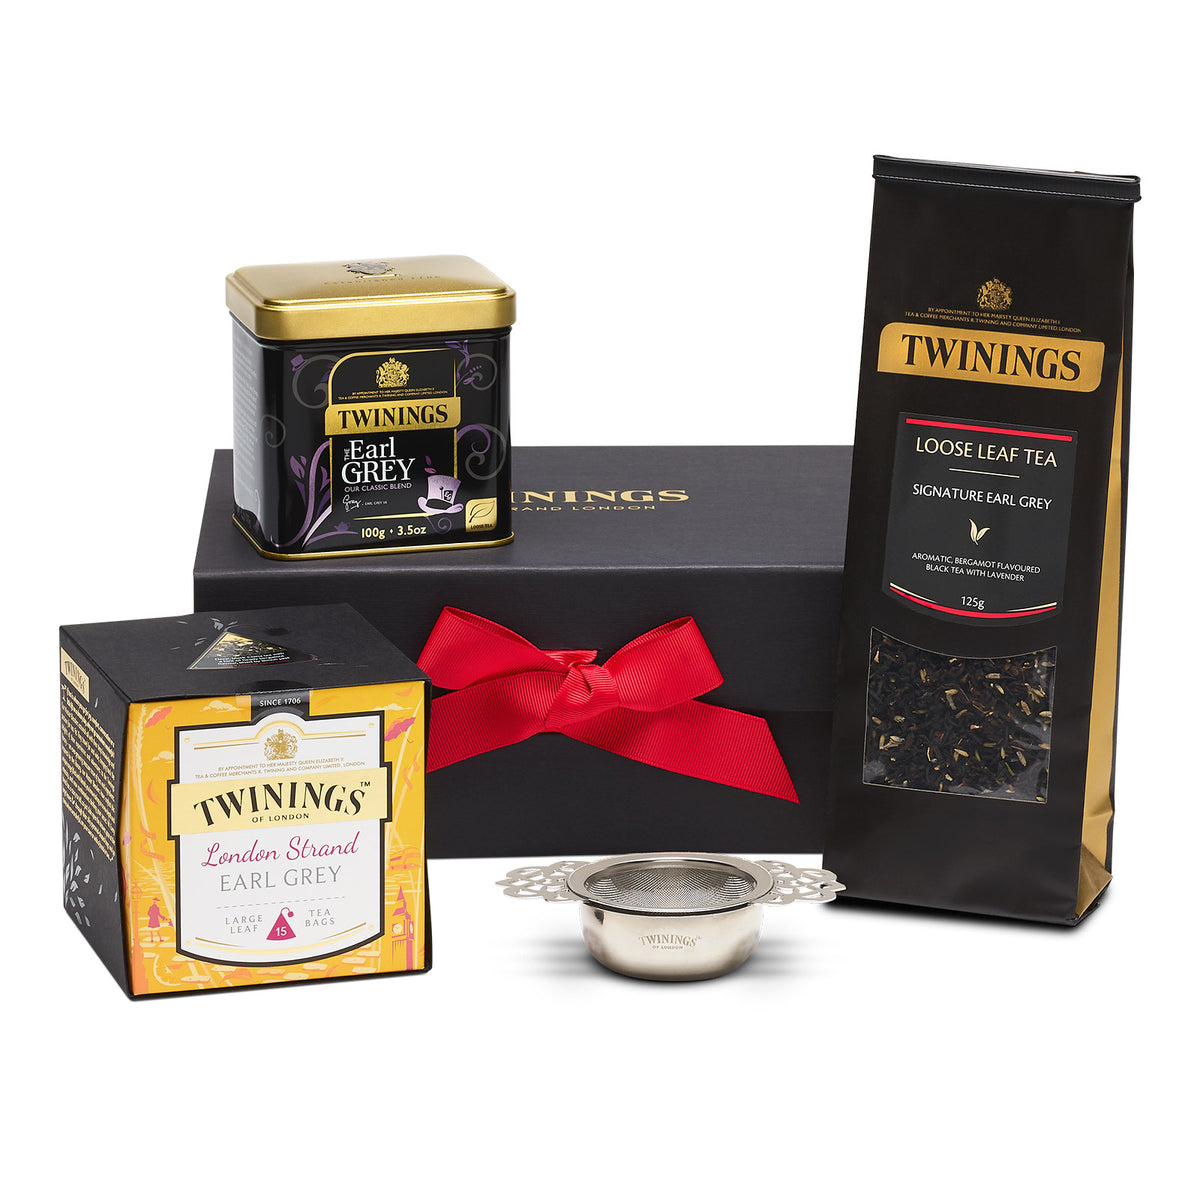 The Earl Grey Connoisseur Gift Box